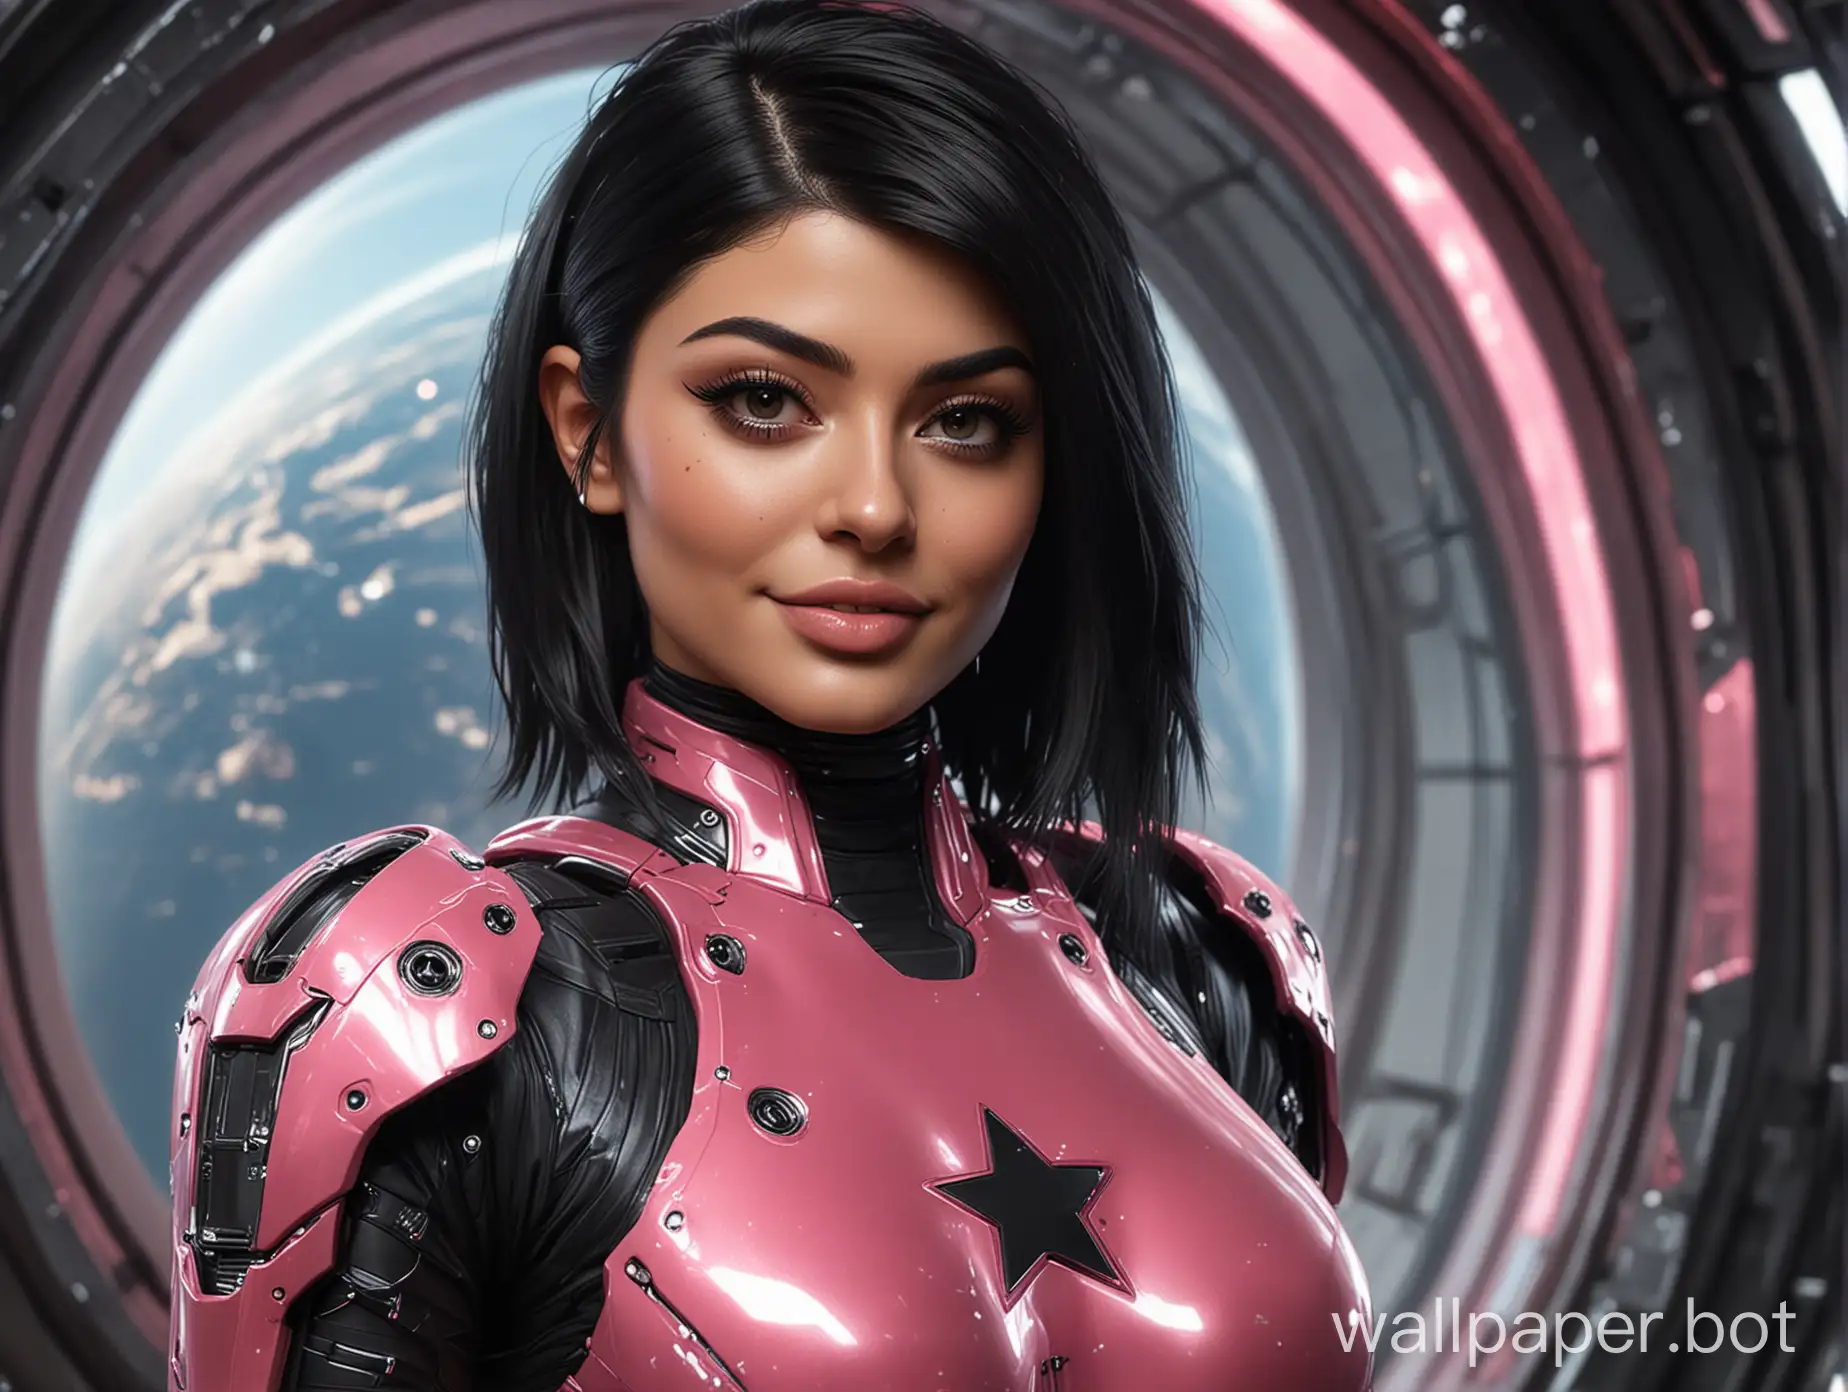 Star Citizen, kylie jenner, selfie, Science-Fiction, close-up headshot, shiny cyber armor undersuit with the 3 colors Pink Black Silver, curvy female bodyshape, stars and planet through a window in the background, black shoulder long hair, natural black eyes, futuristic headgear, open smiling with showing teeth